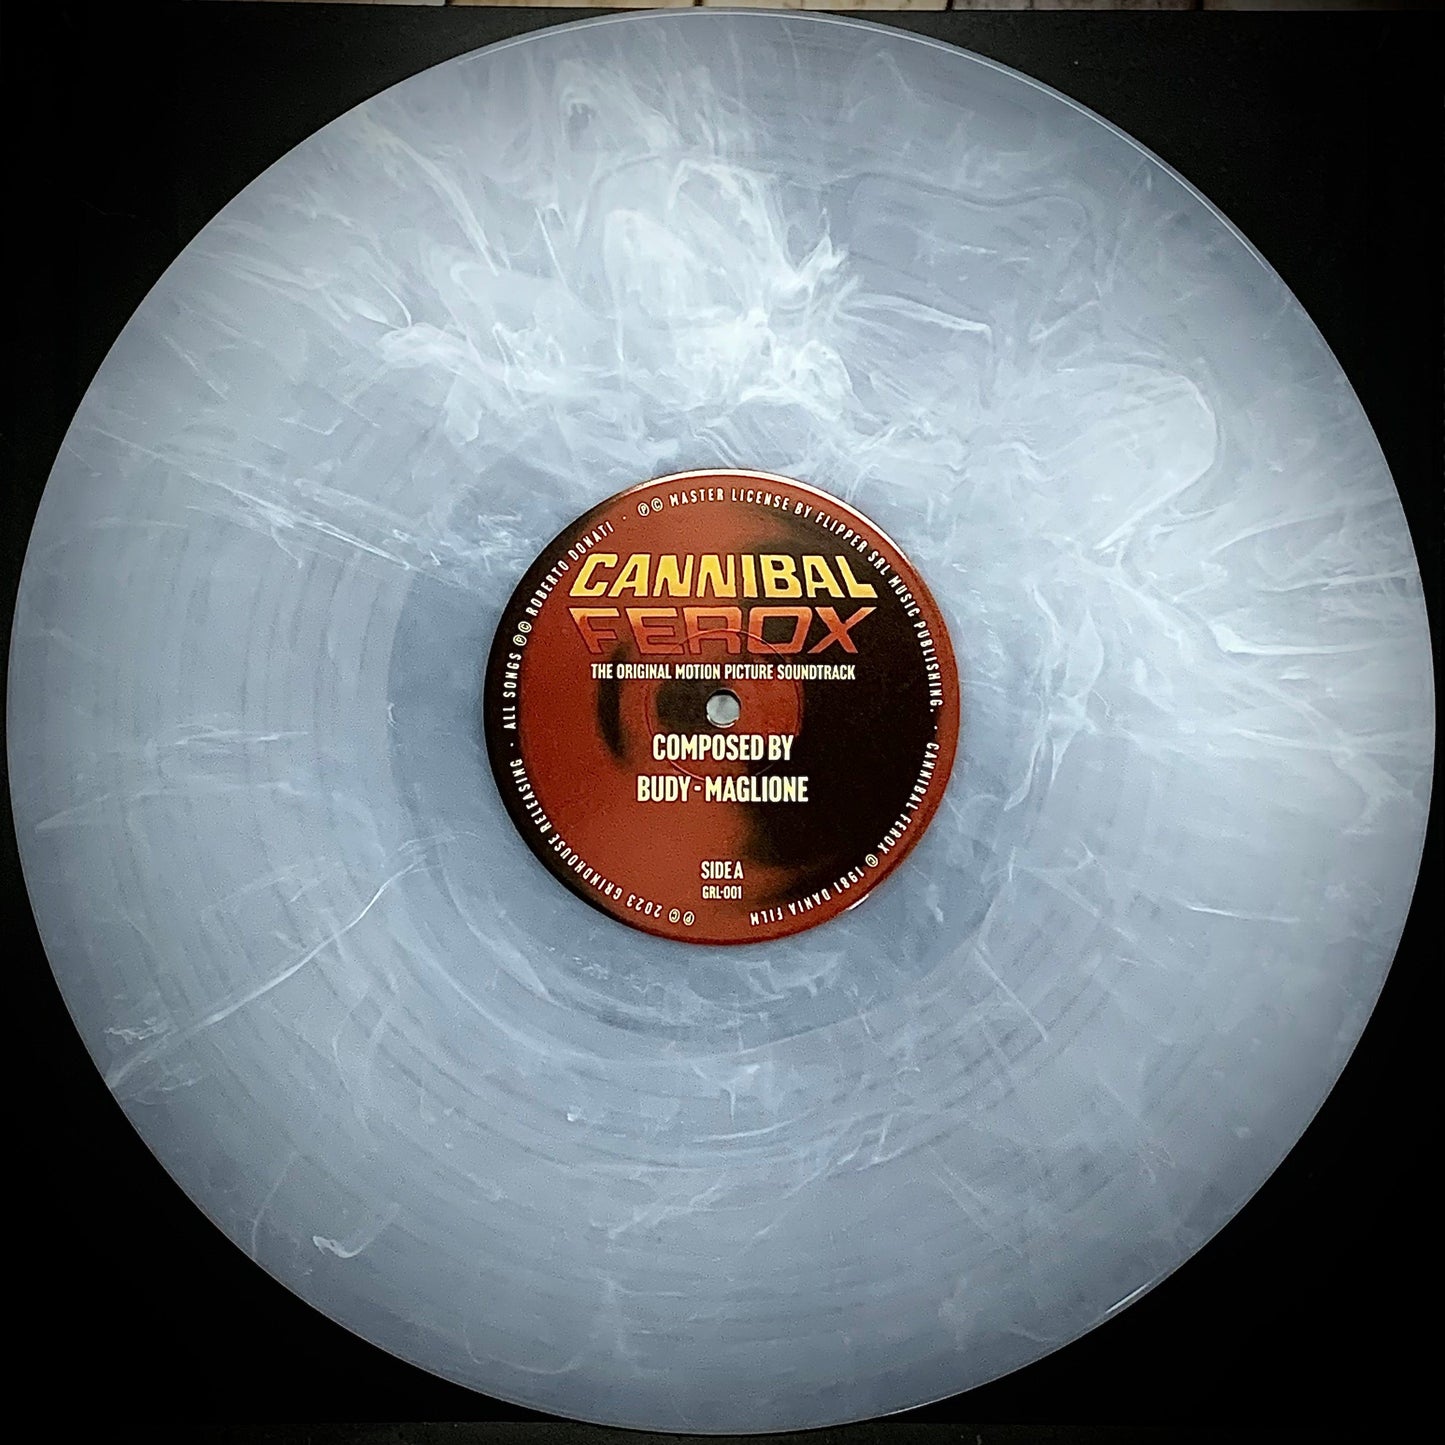 CANNIBAL FEROX: The Original Motion Picture Soundtrack LP (Deluxe gatefold edition) (Limited color vinyl with slipmat)